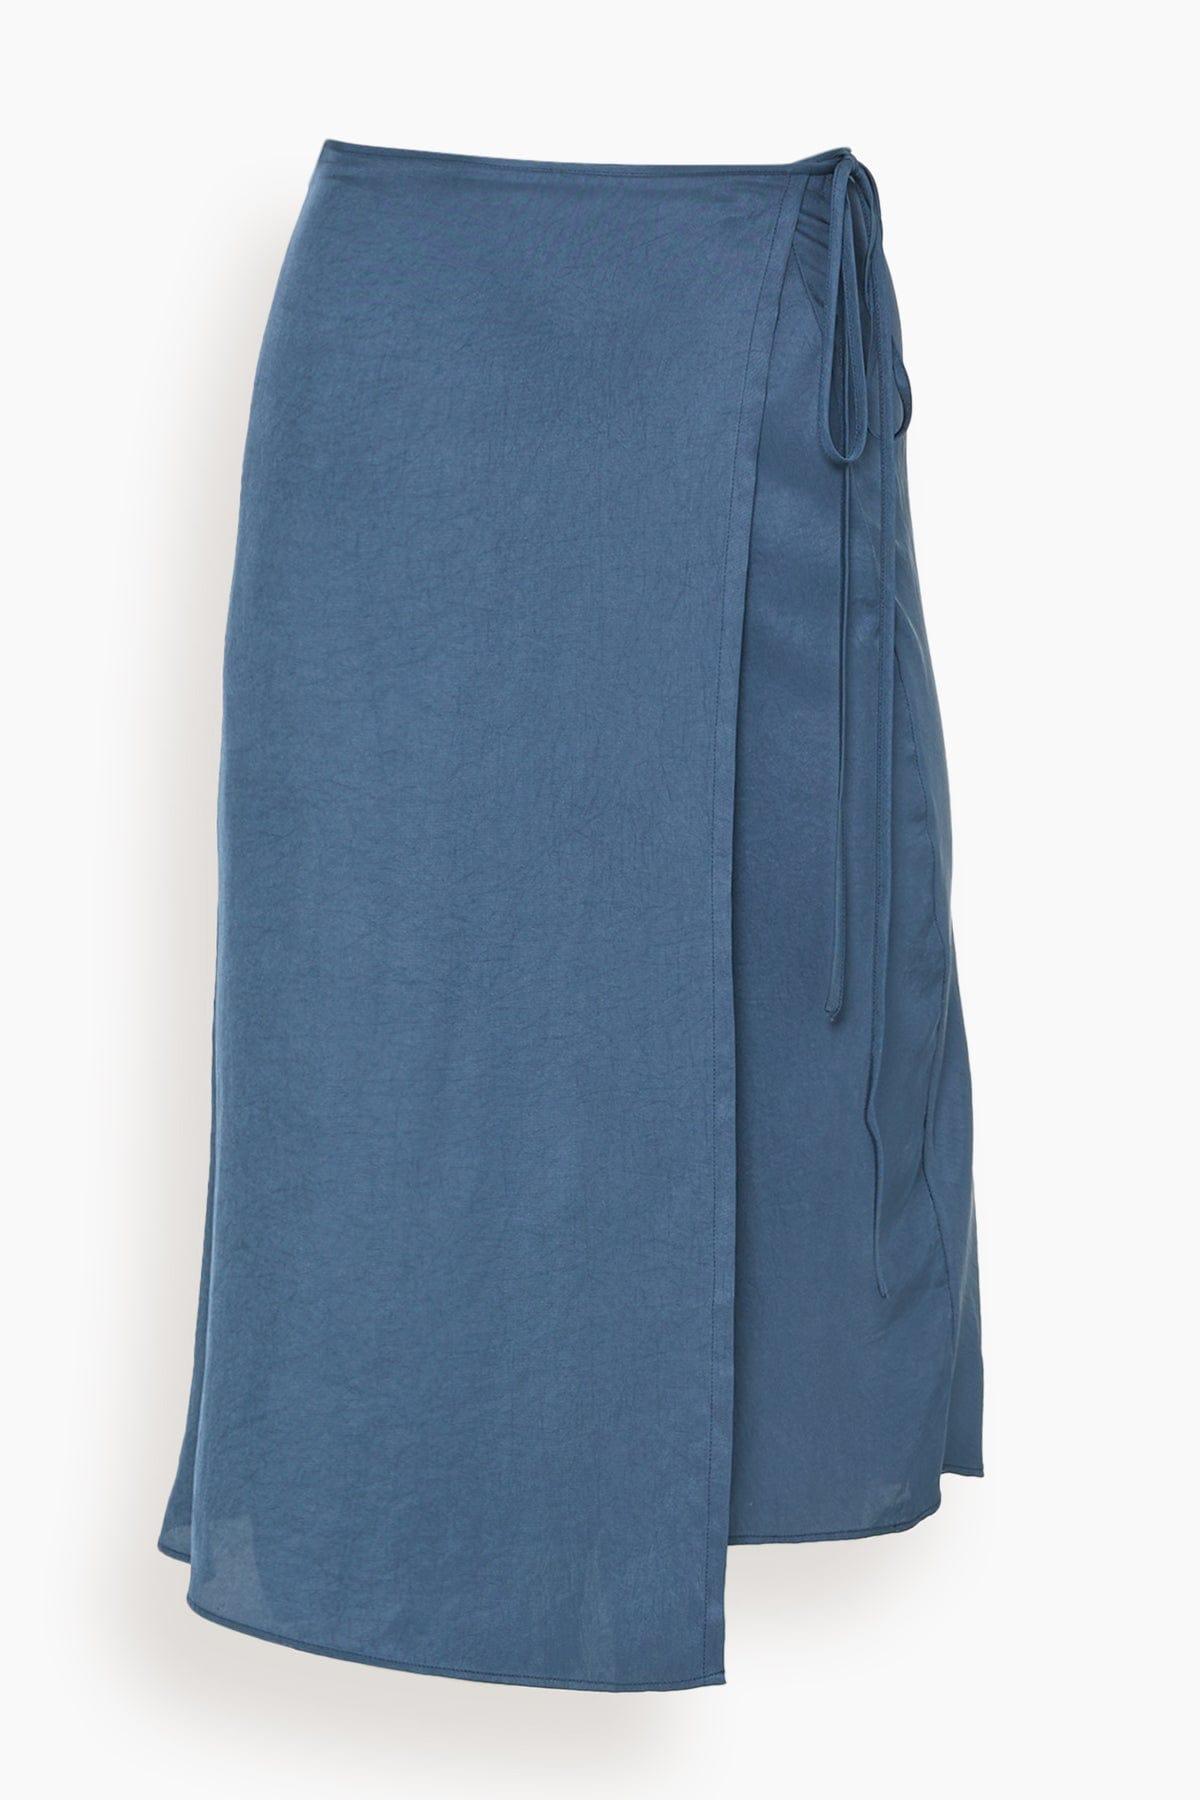 Ciao Lucia Ricarda Skirt in Blue | Lyst